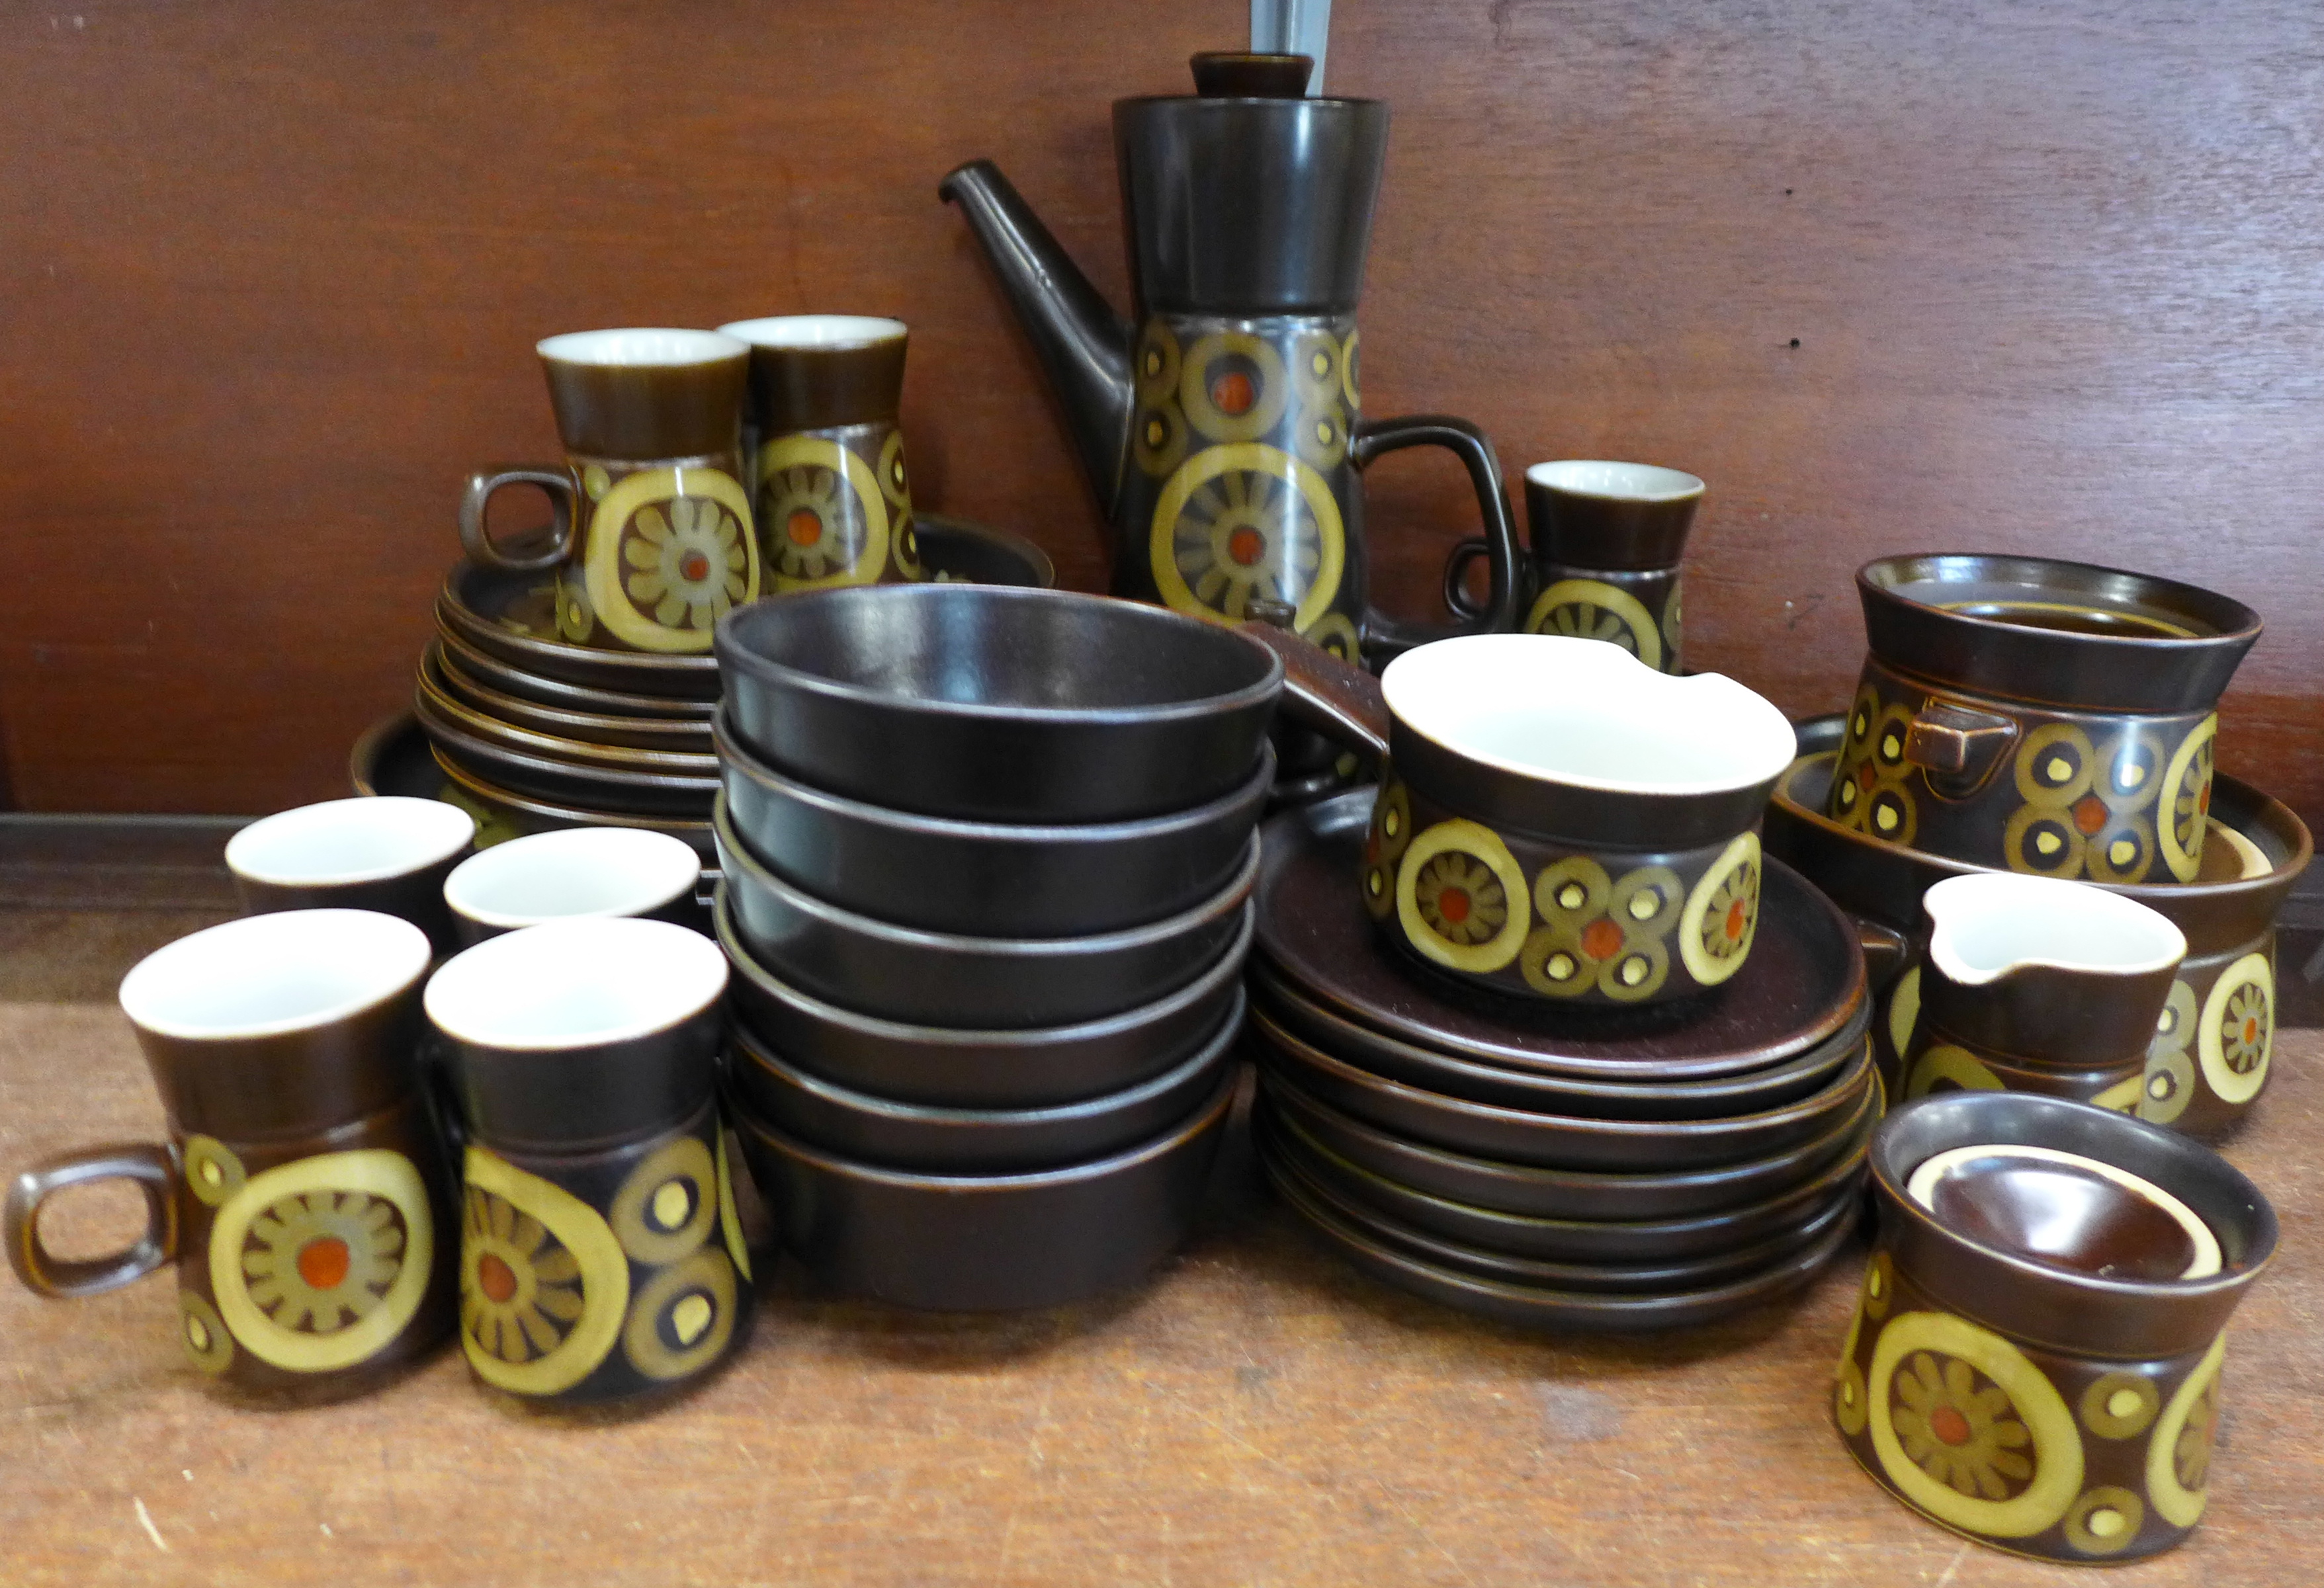 A Denby Arabesque dinner and coffee service including six side plates, six plates, seven mugs and